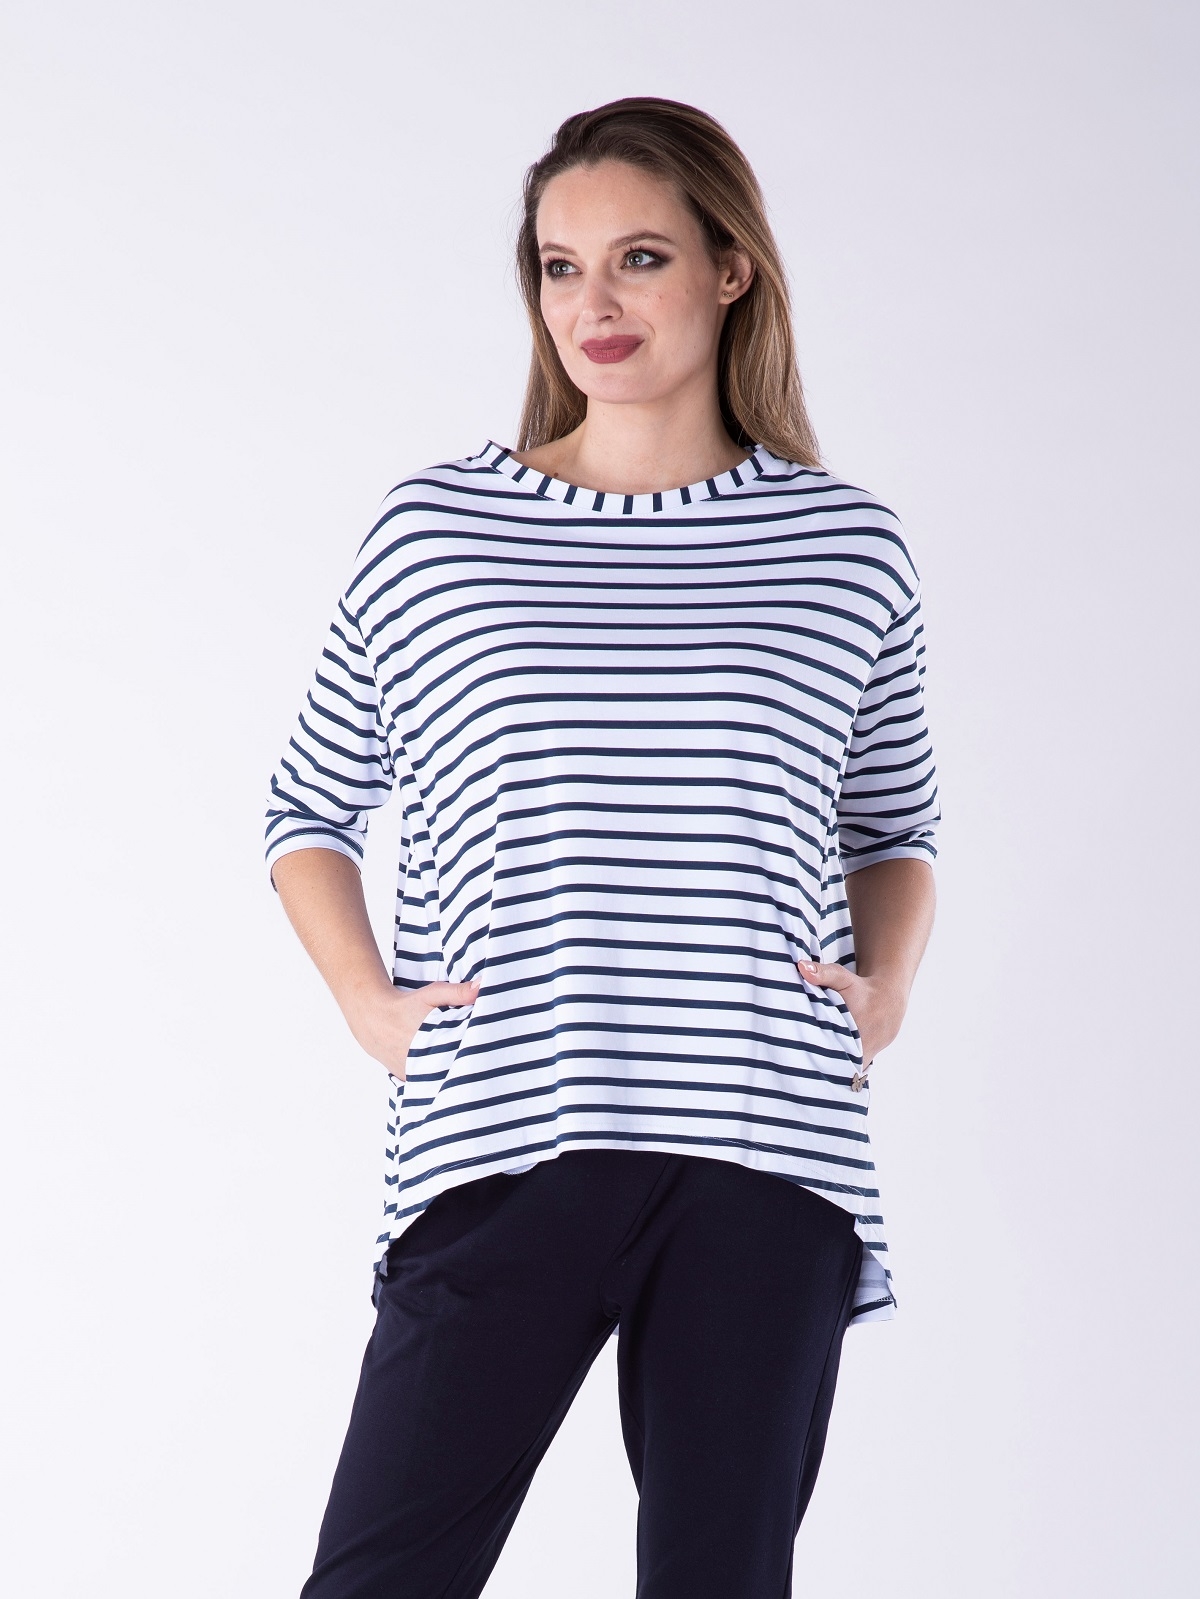 Levně Look Made With Love Woman's Blouse 32 Portofino Navy Blue/White